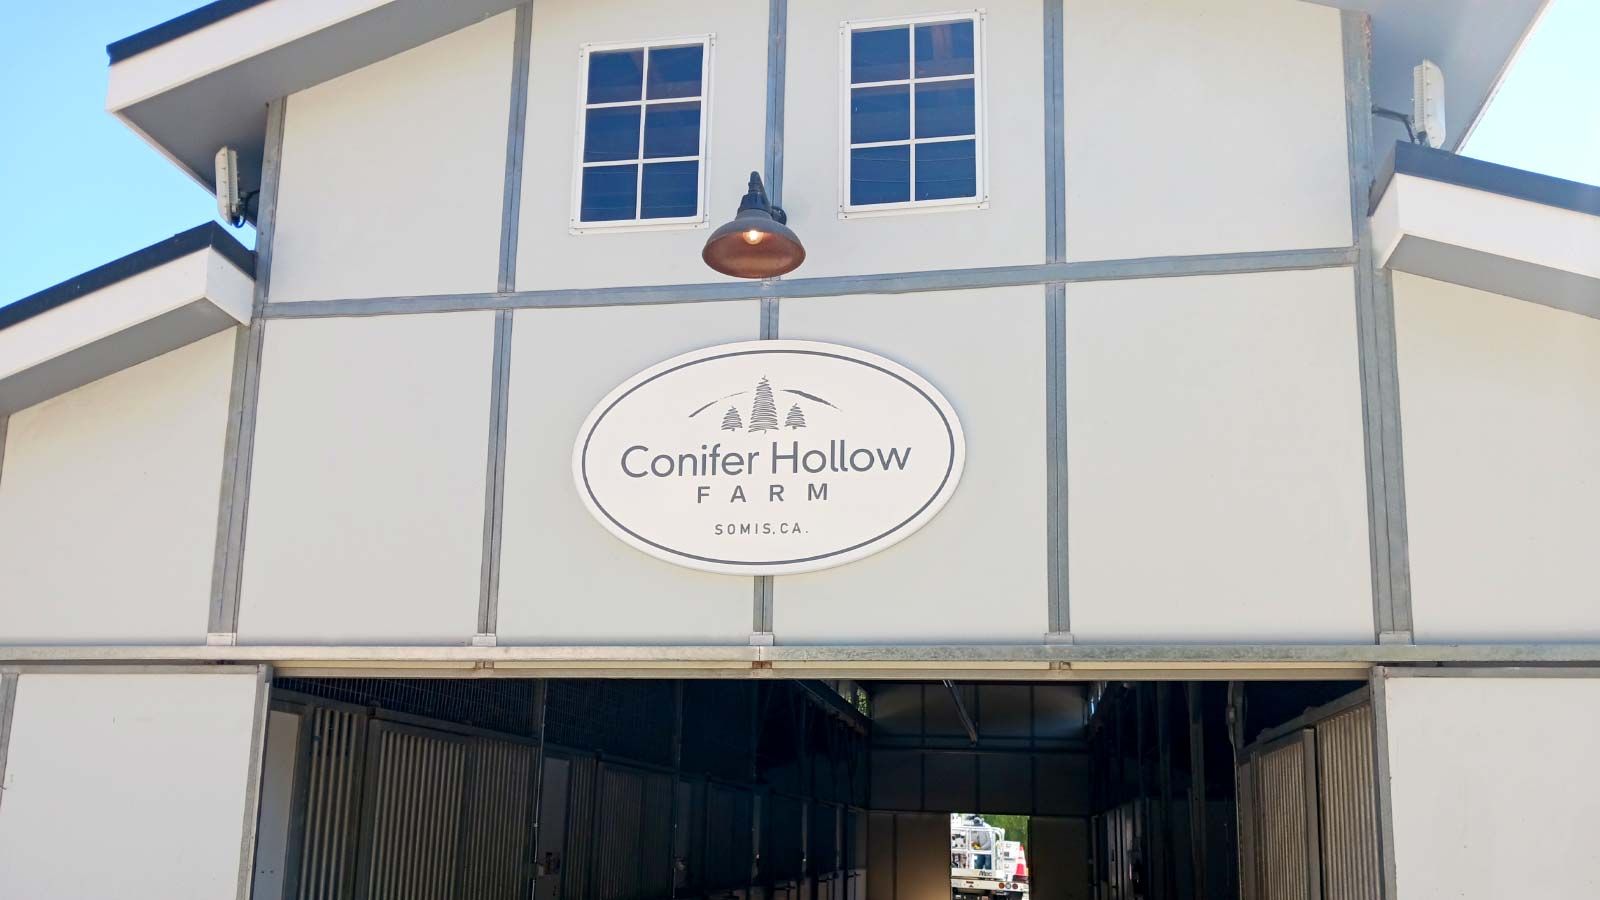 Conifer Hollow Farm outdoor sign placed above the entrance